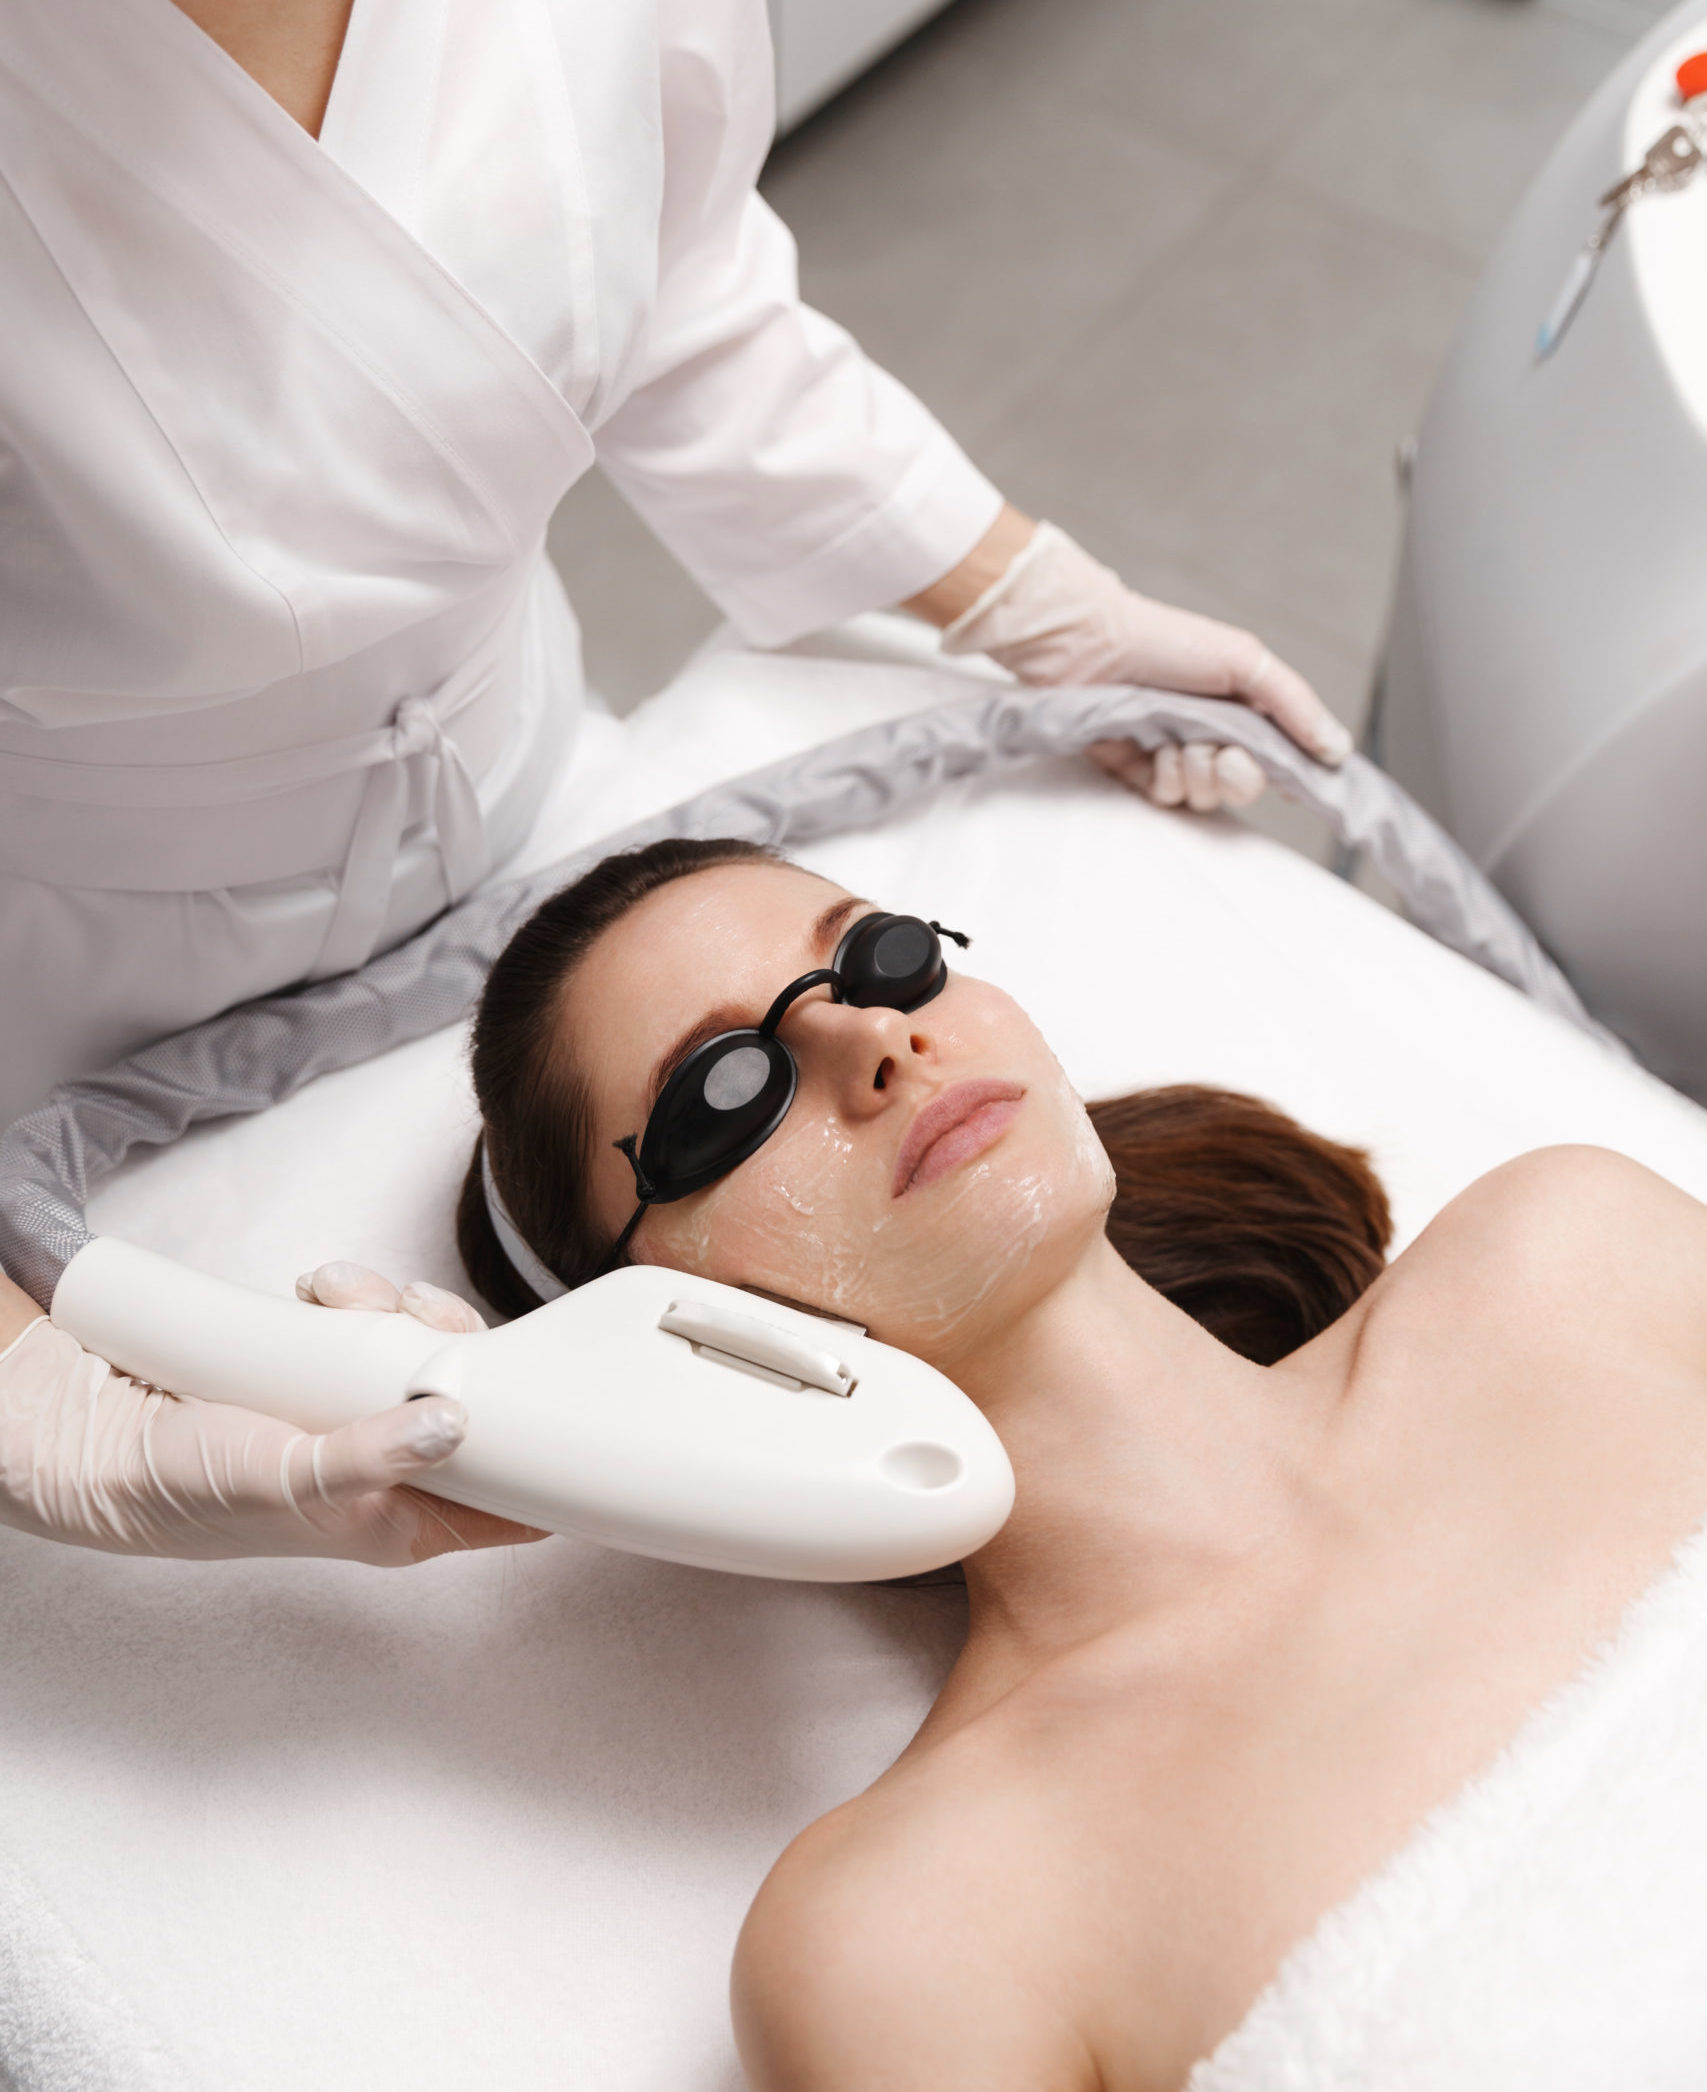 Photofacial Treatment Benefits And Side Effects